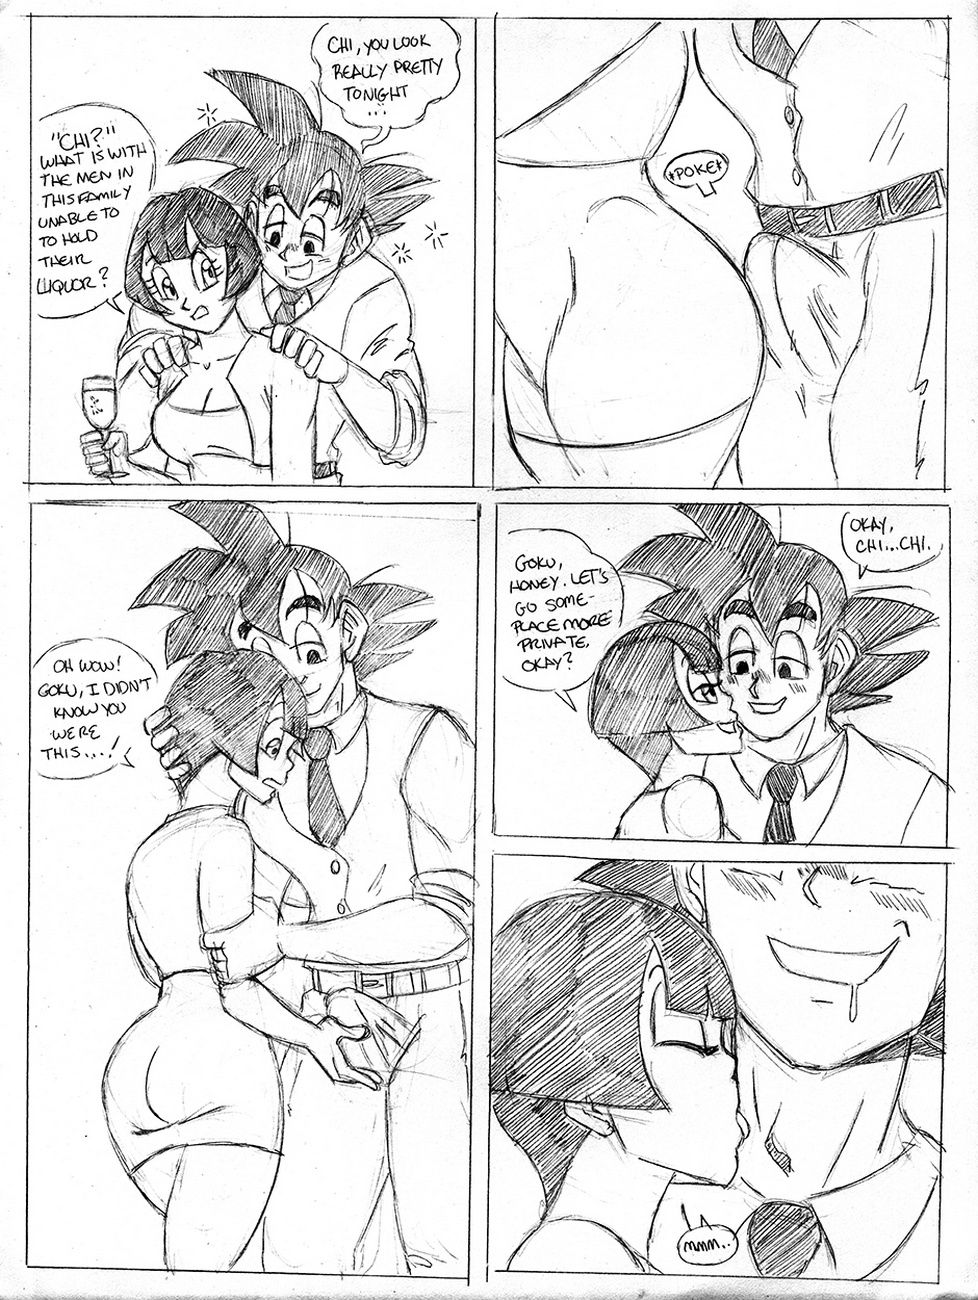 Drunk Goku And Videl page 2